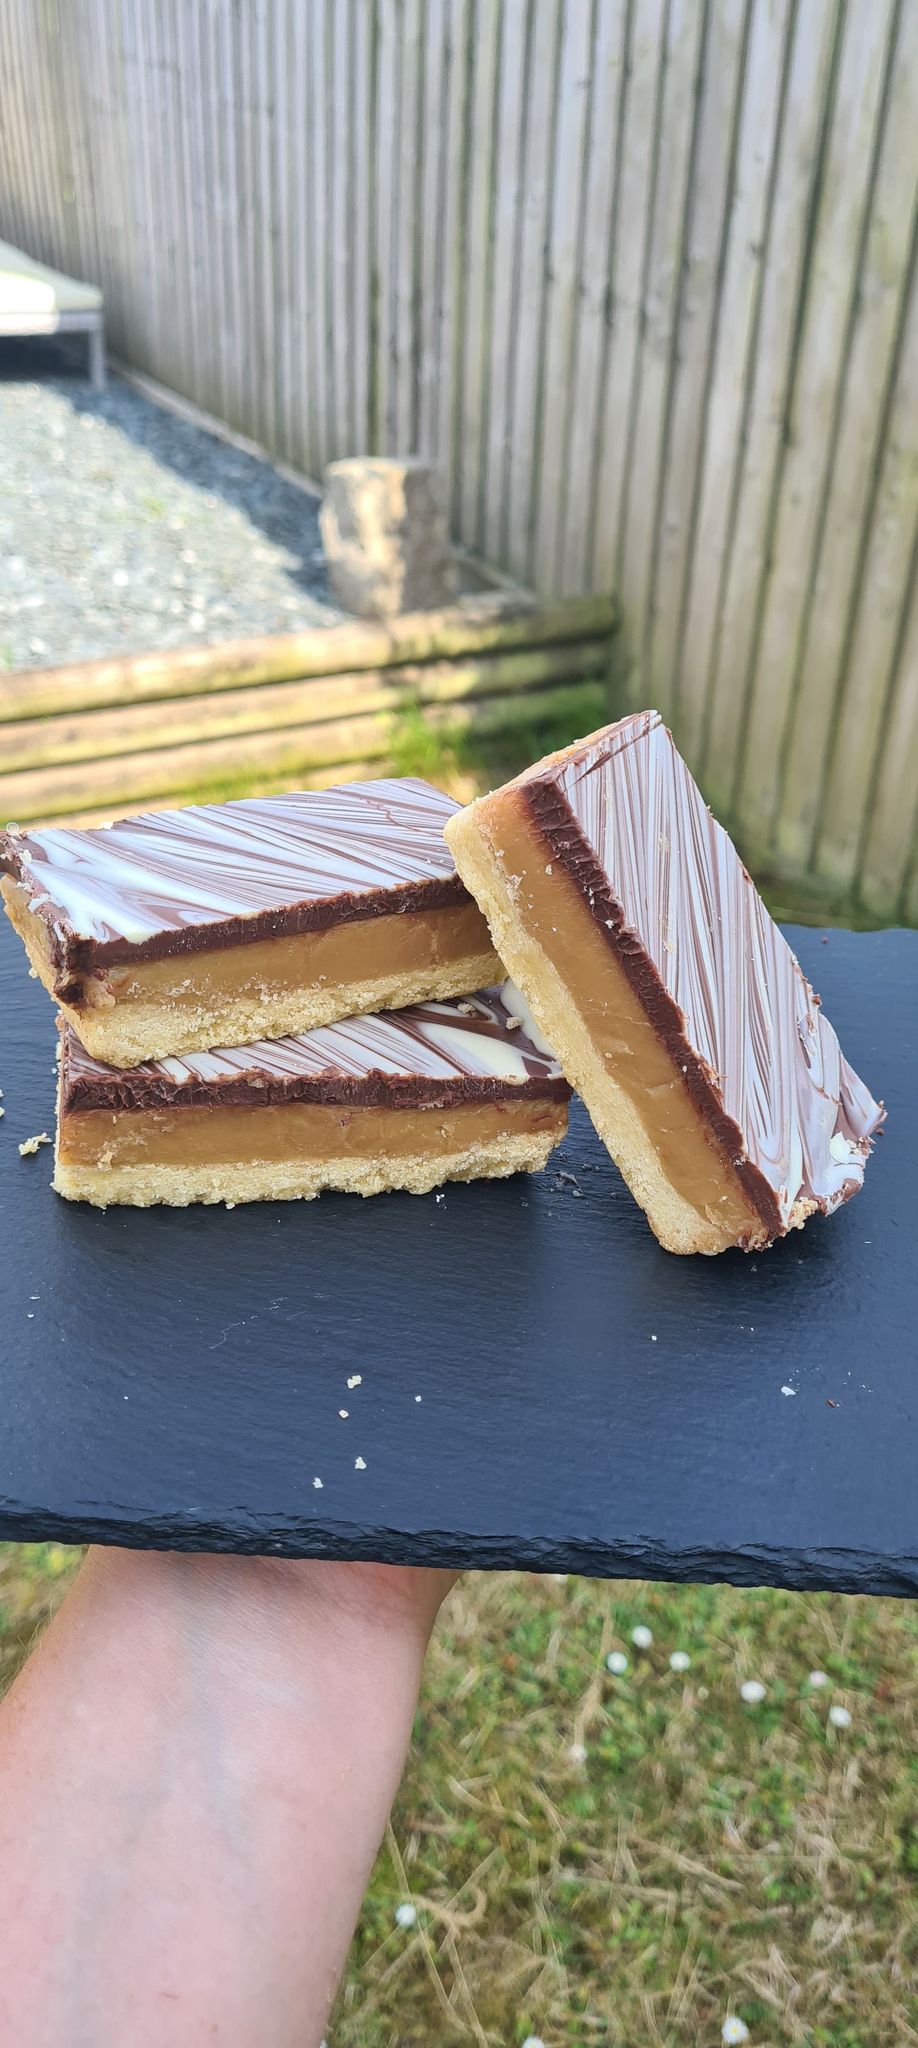 Who does't love caramel shortbread?! You'll get milk chocolate, fudge and shortbread all in one!